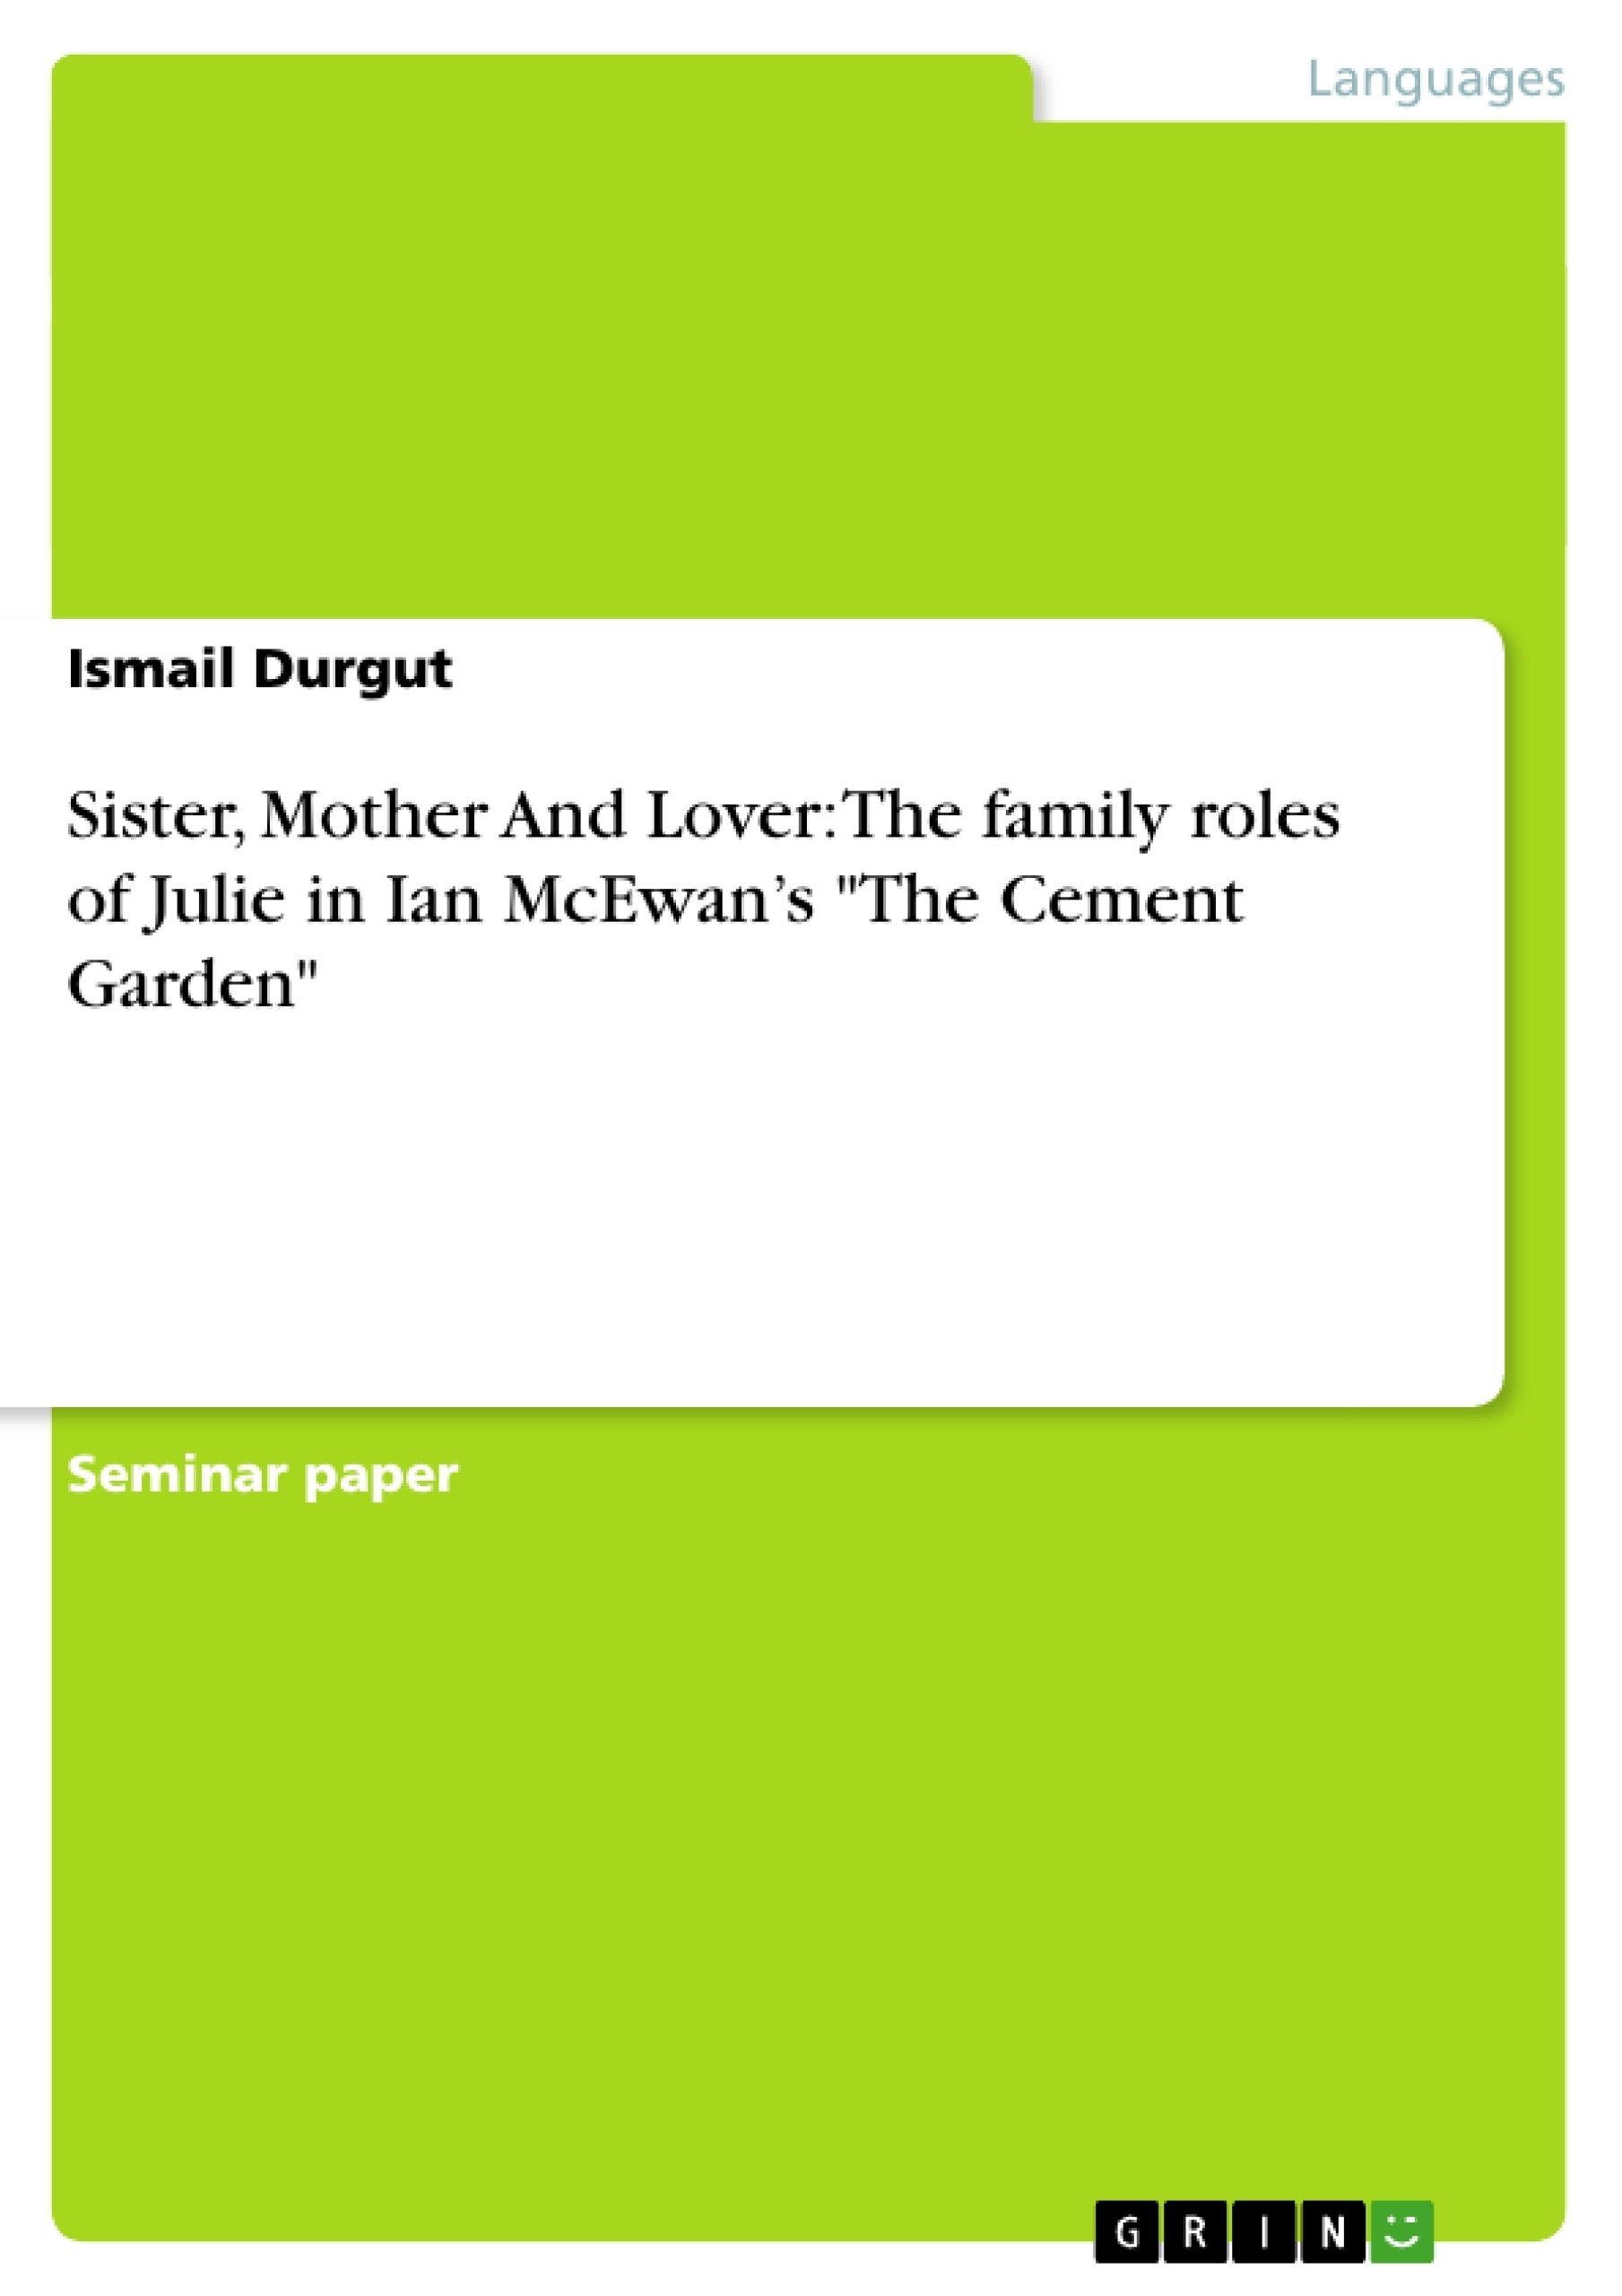 Title: Sister, Mother And Lover: The family roles of Julie in Ian McEwan’s "The Cement Garden"